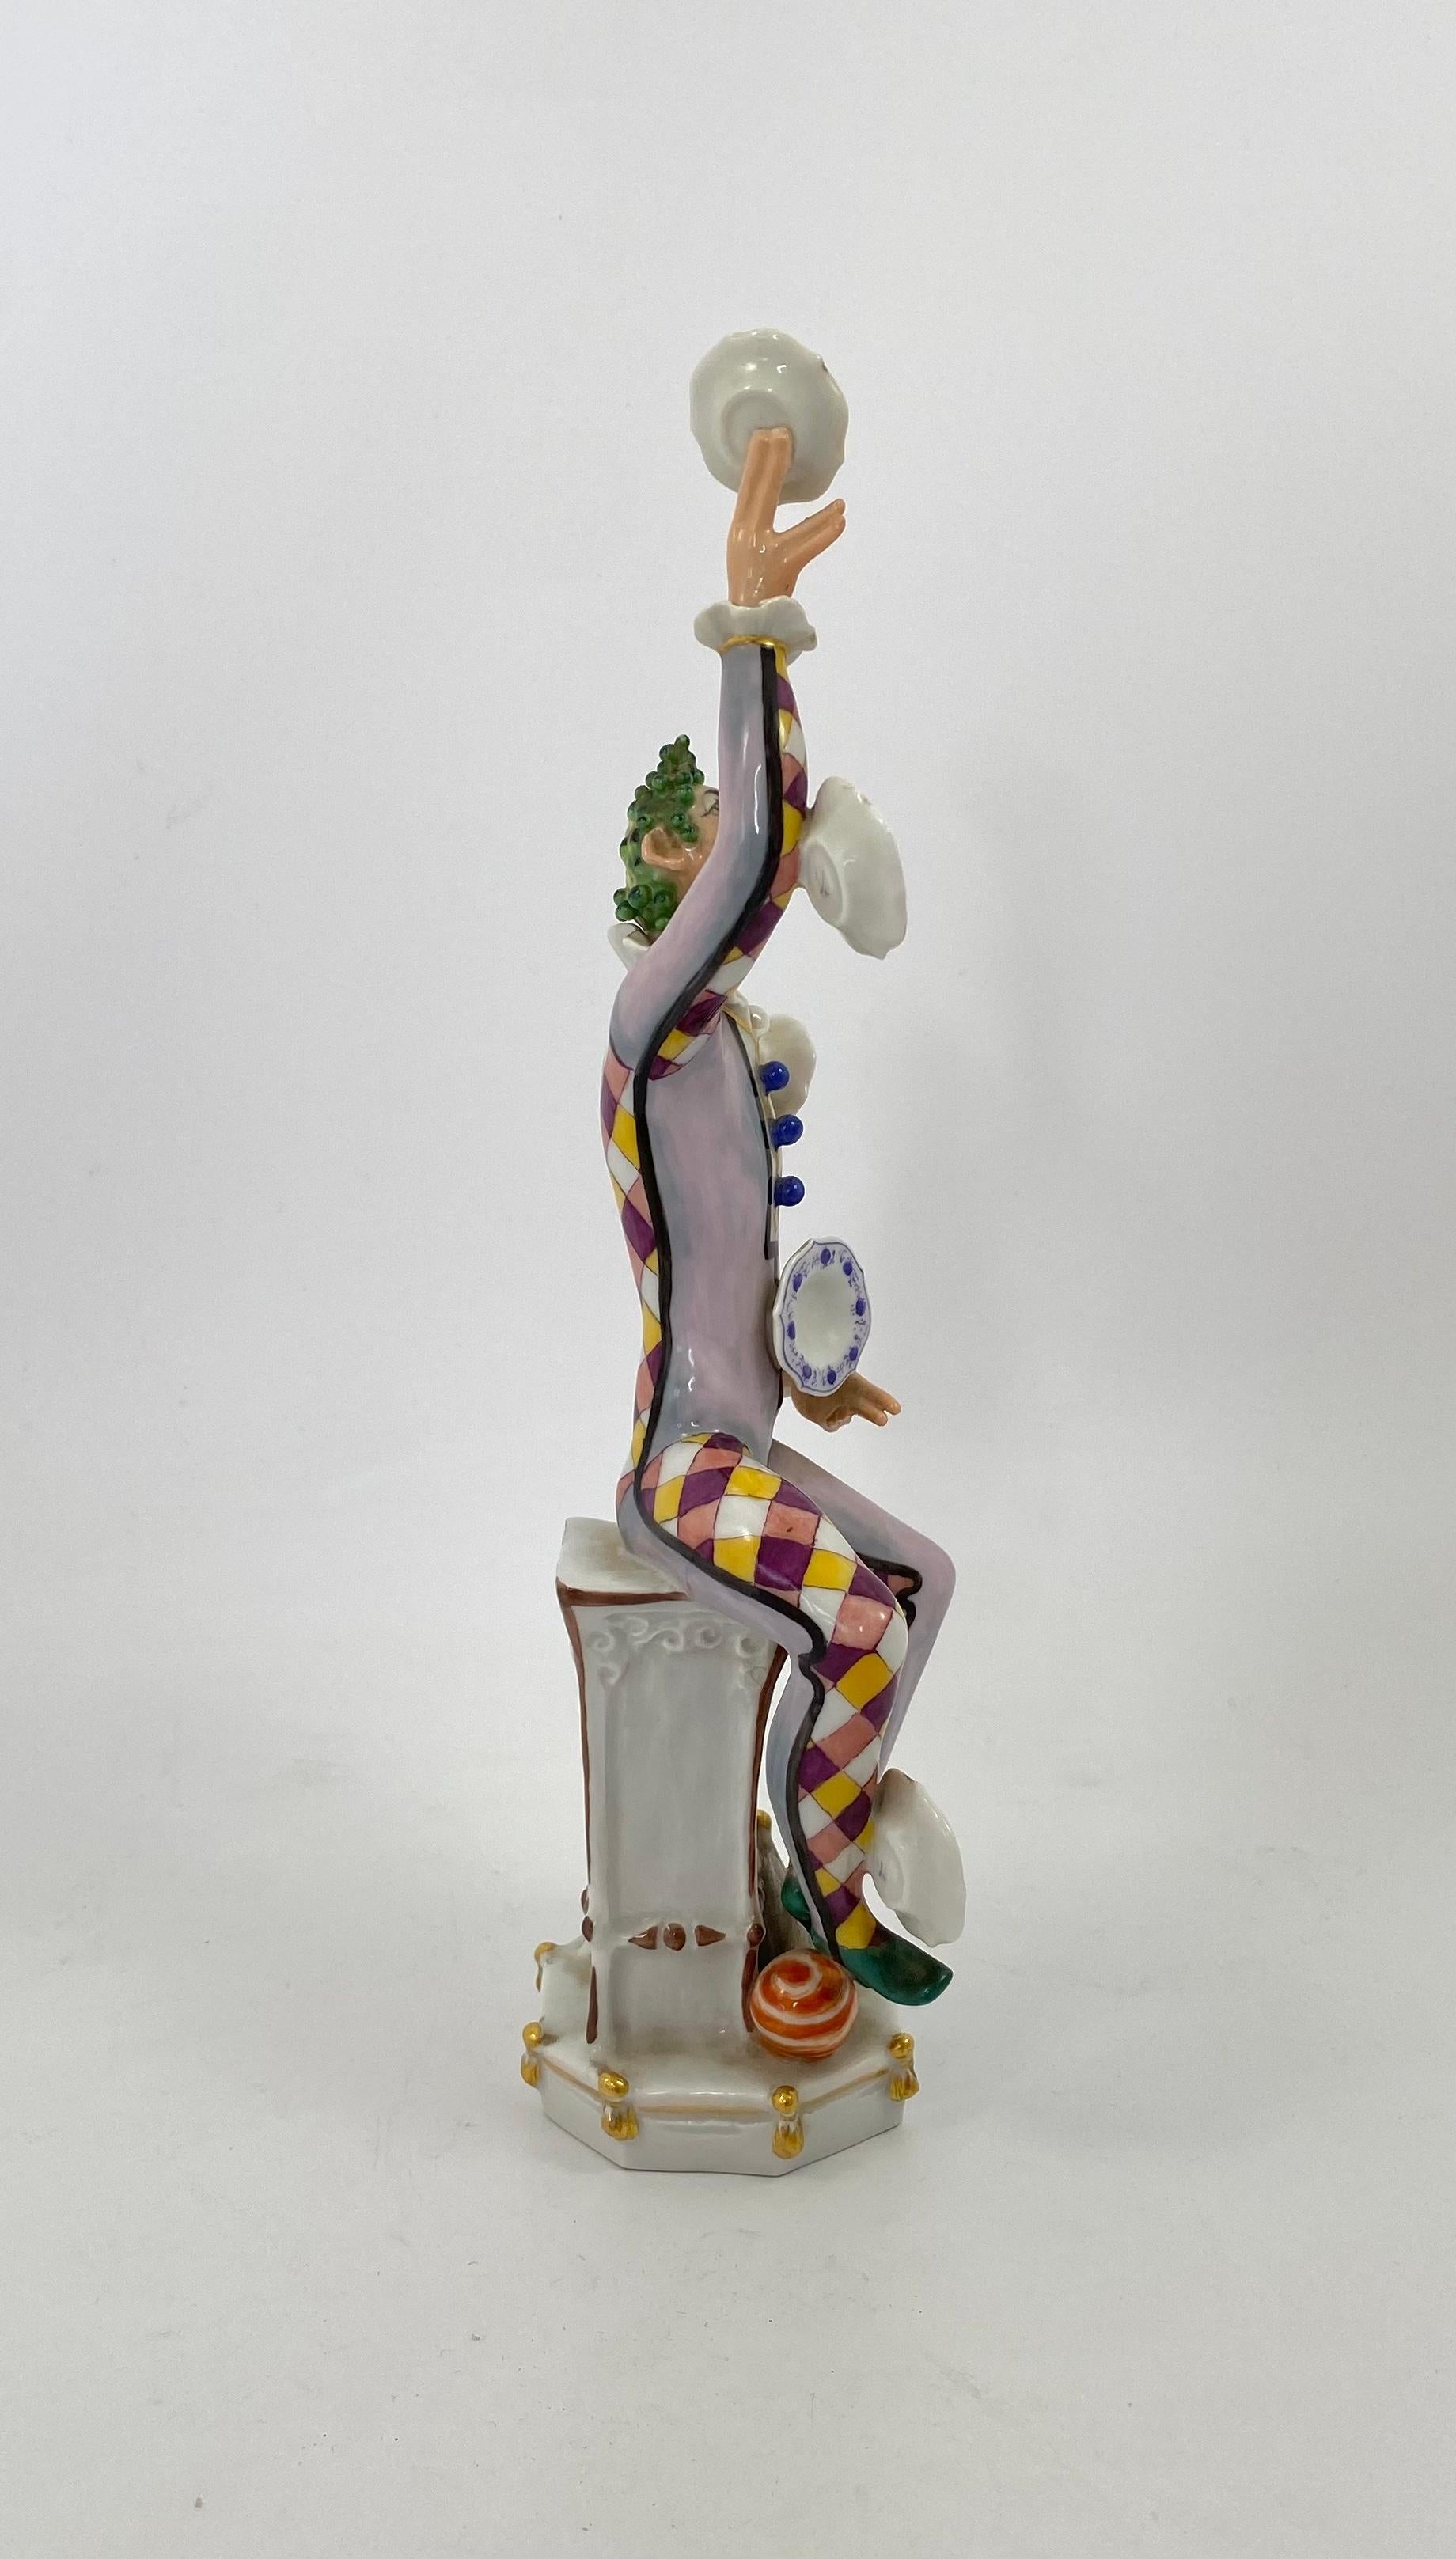 Meissen porcelain figure ‘Der Jongleur’, 1976. This wonderfully conceived figure, modelled by Peter Strang, as a clown juggler, dressed as Harlequin, juggling five Meissen ‘Onion pattern’ plates. He is seated upon an architectural column, sprigged